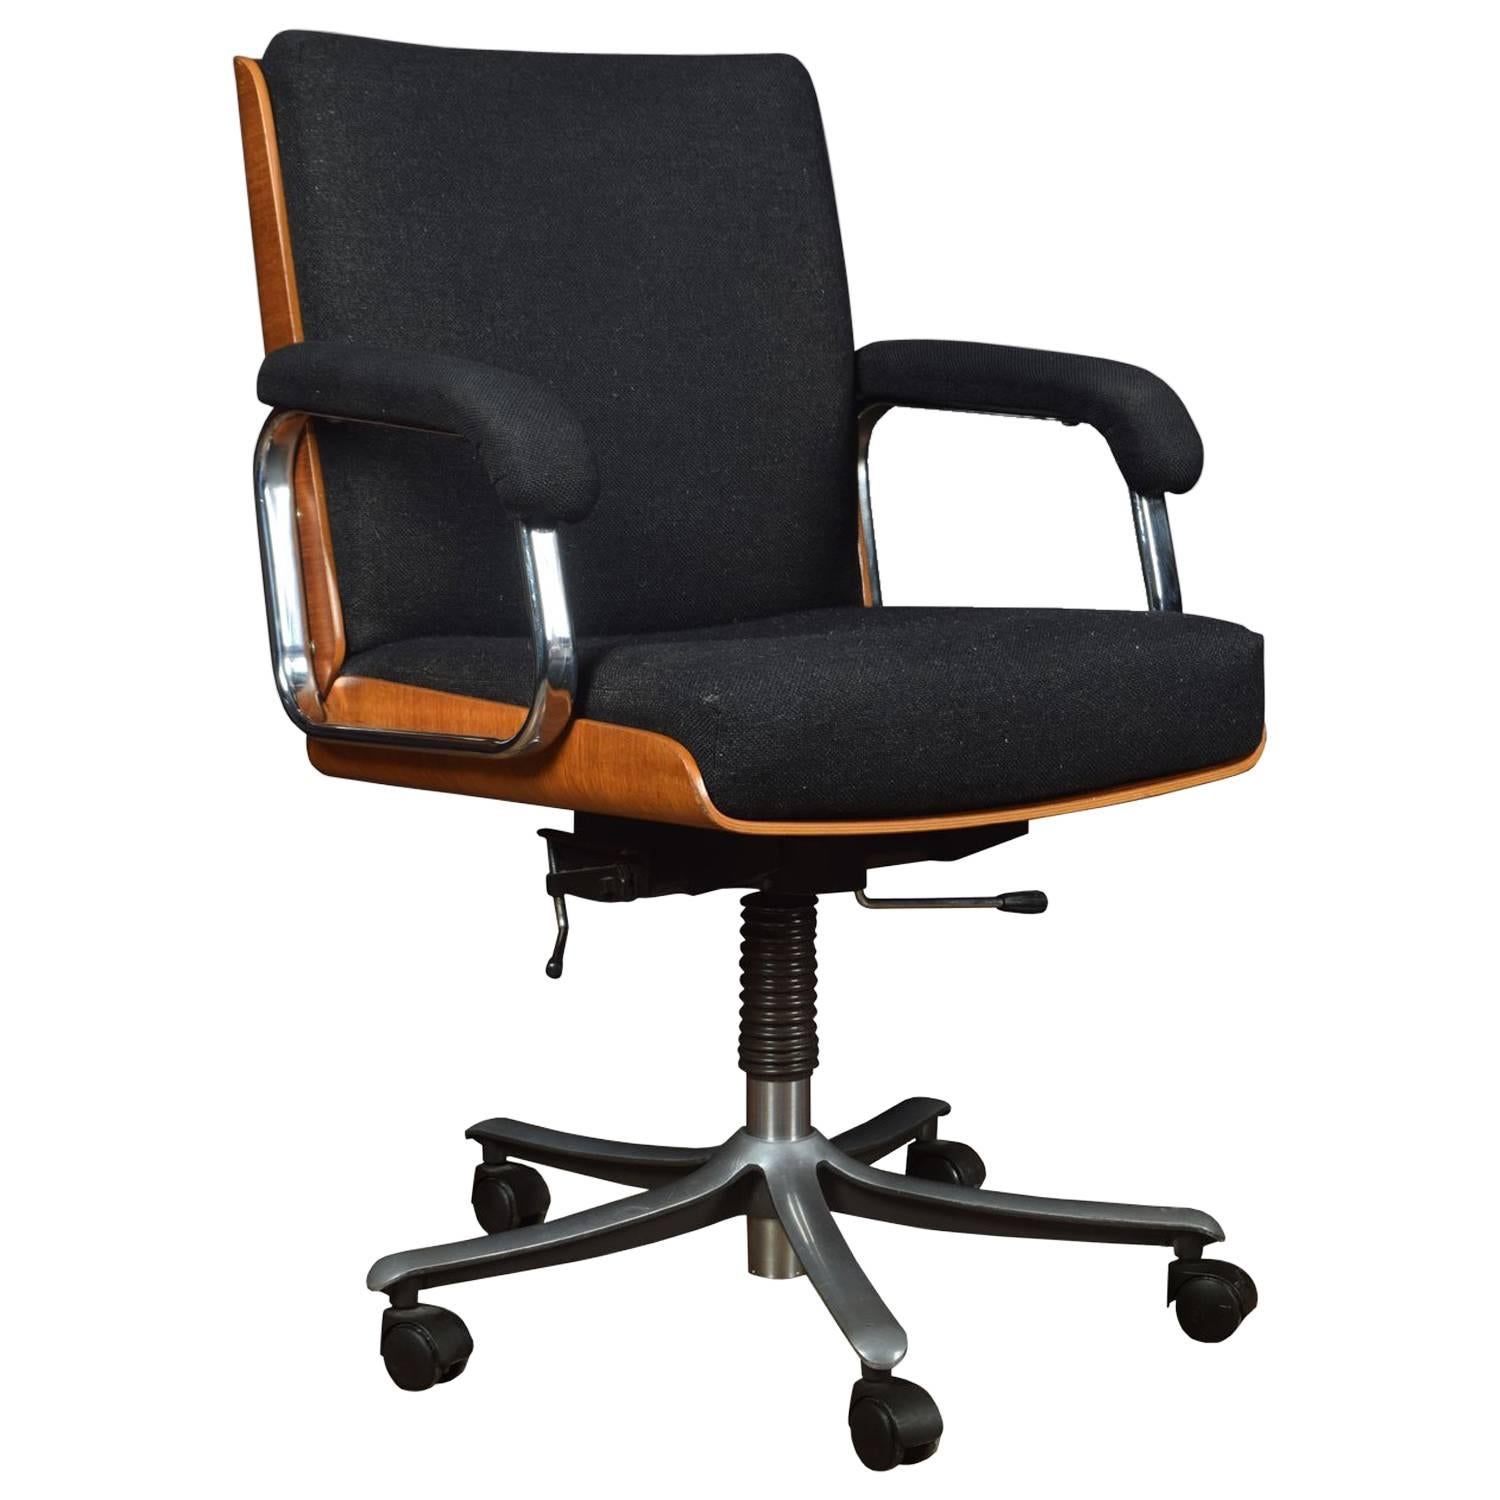 Eames Style Swivel Office Chair